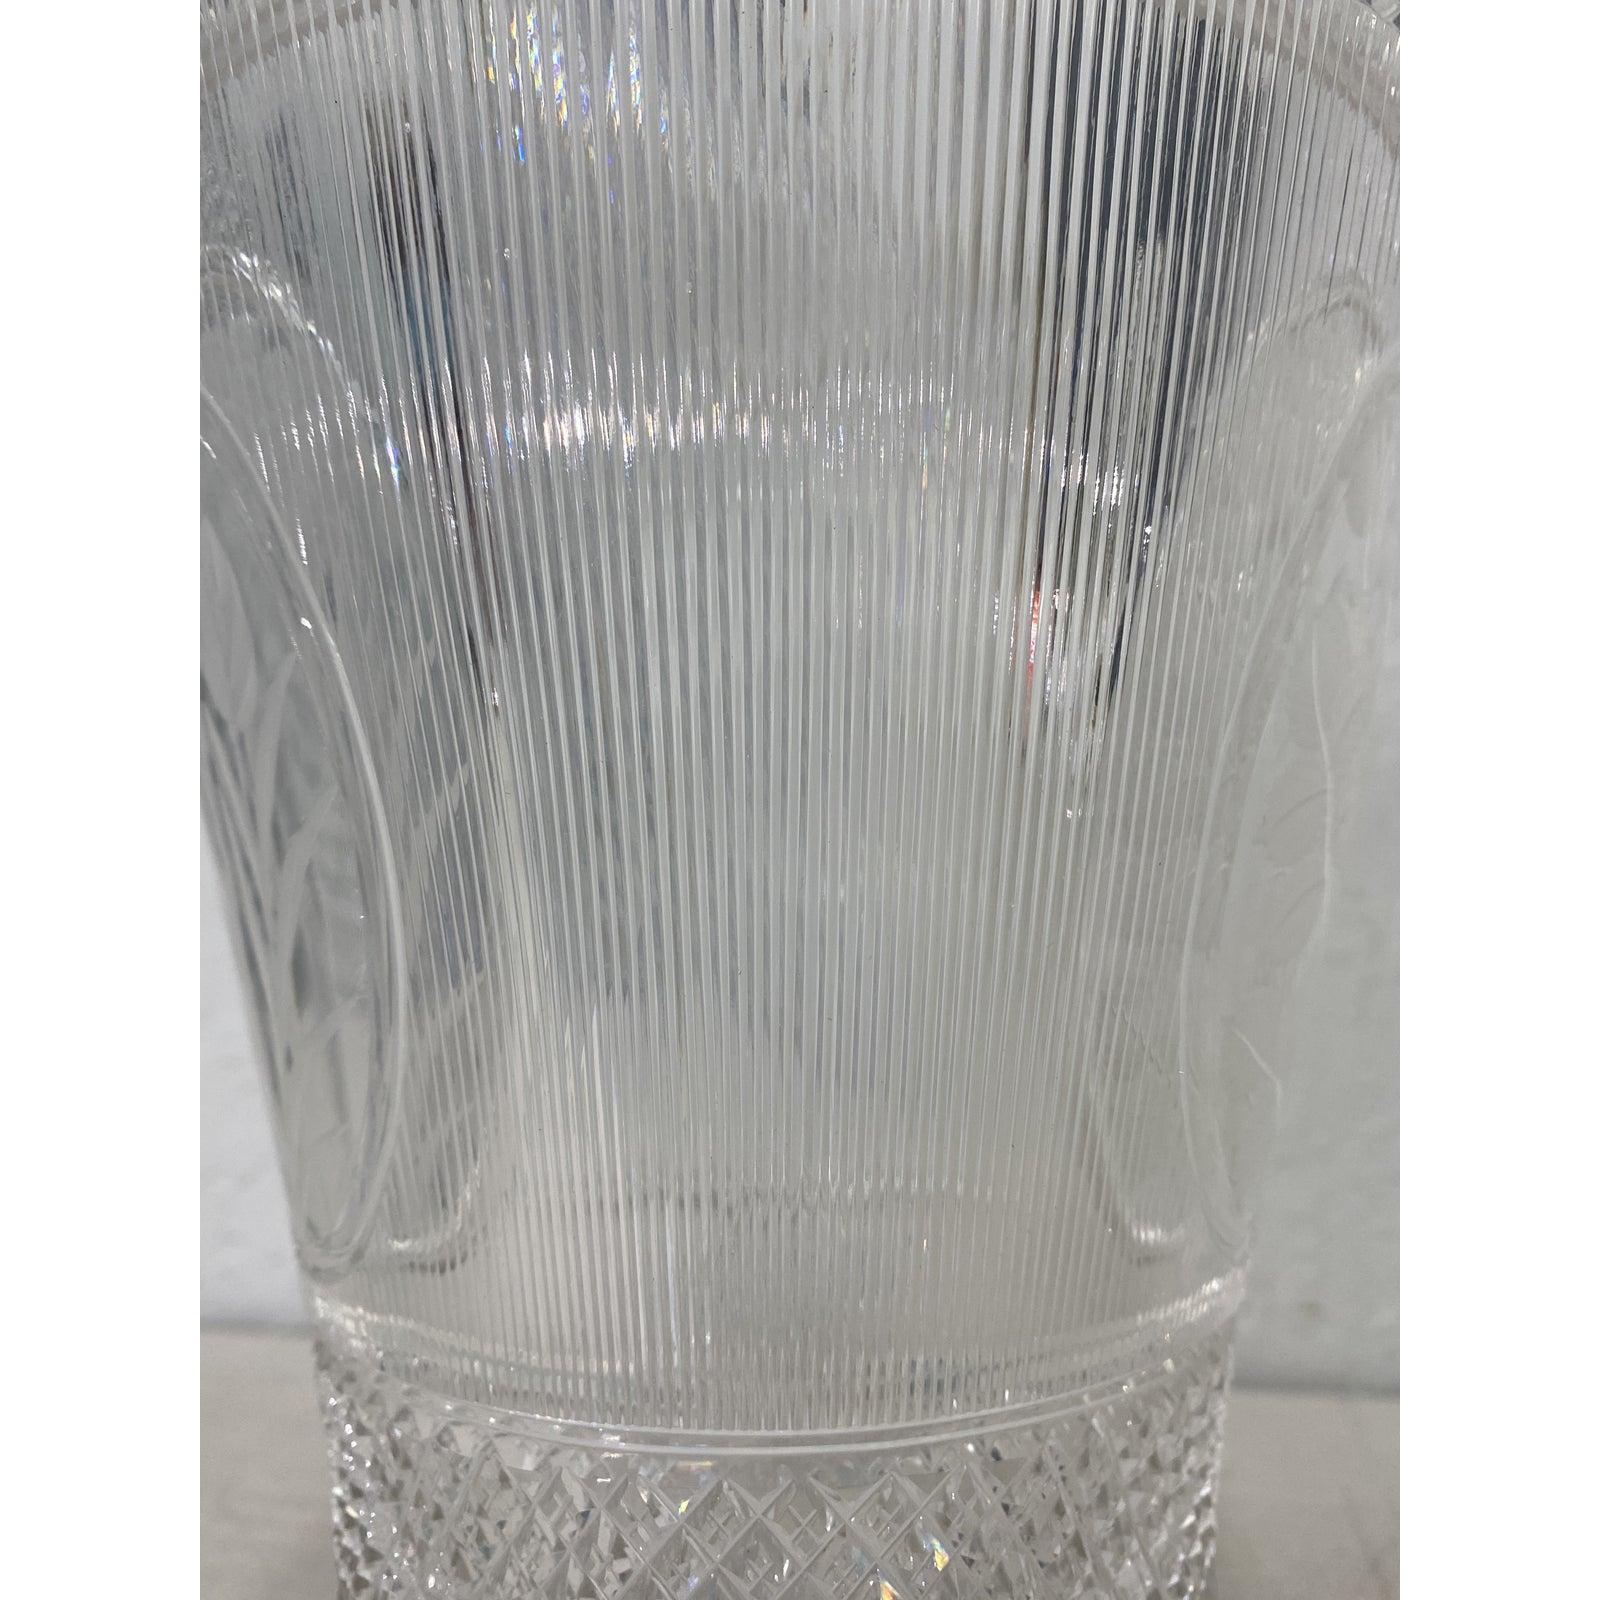 Antique handcut crystal vase with floral and grape motif, circa 1920

An absolutely gorgeous handcut crystal vase. We have found no information on the maker, but the quality cannot be overstated. Lovely main body floral medallions and smaller